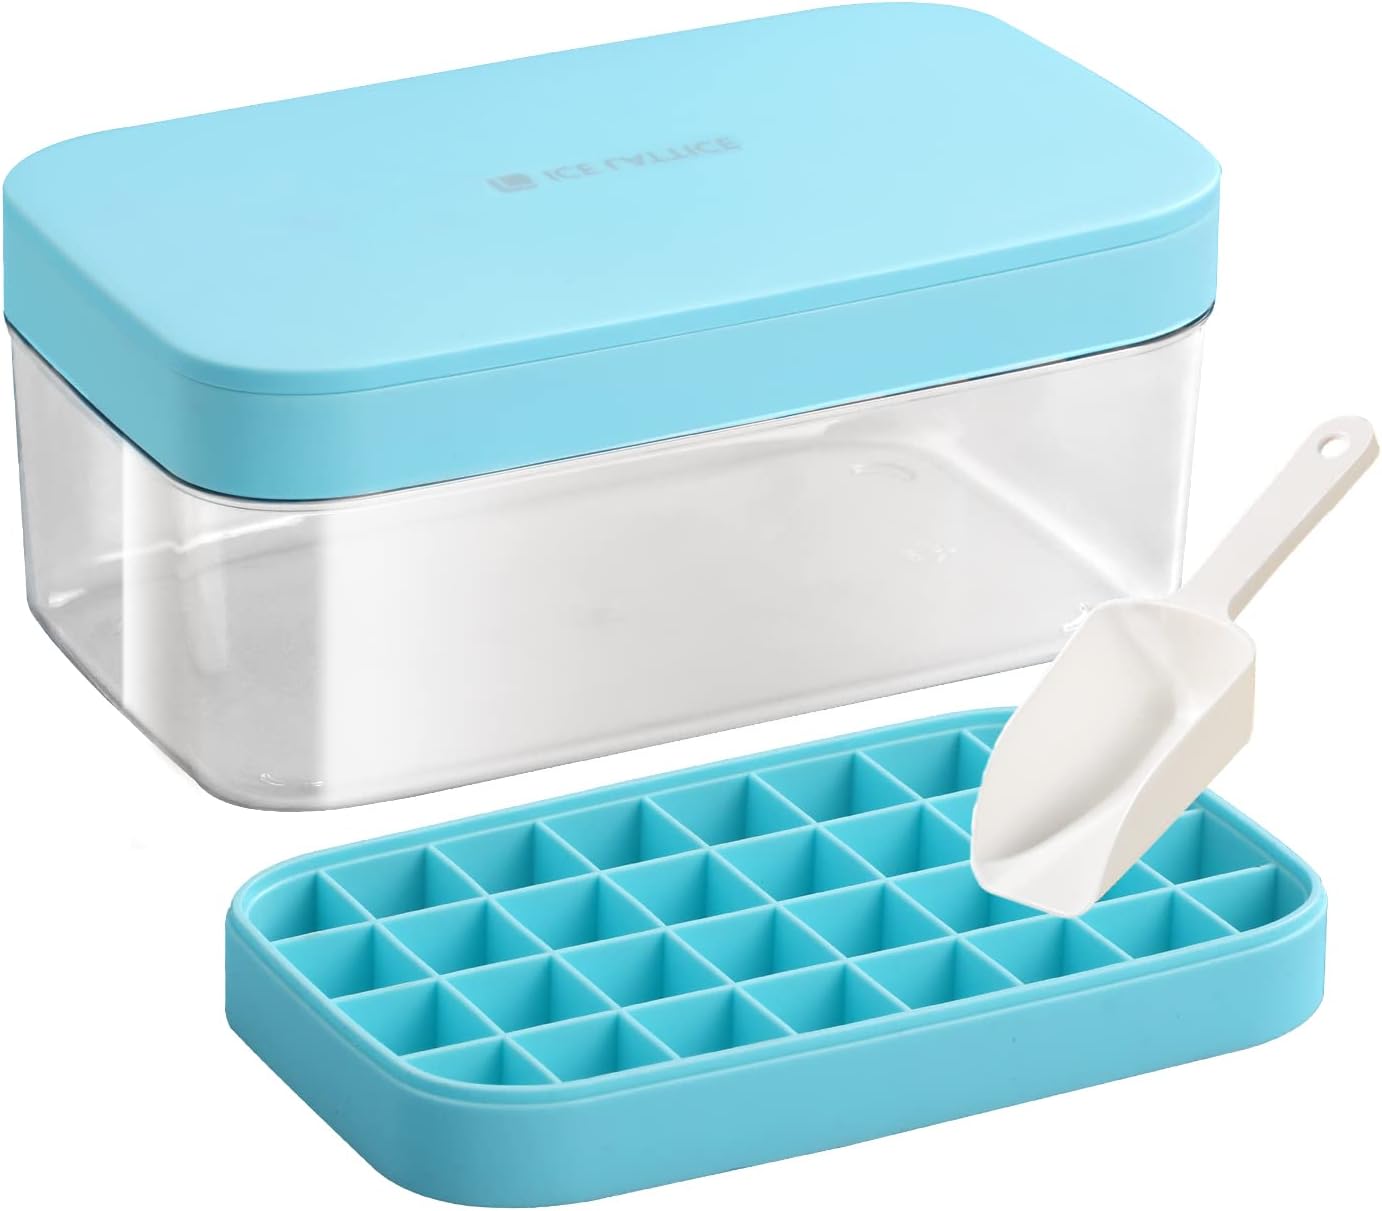 Food-grade Silicone Ice Cube Tray with Lid and Storage Bin for Freezer,  Easy-Release 55 Small Nugget Ice Tray with Spill-Resistant Cover&Bucket,  Flexible Ice Cube Molds with Ice Container - Blue 